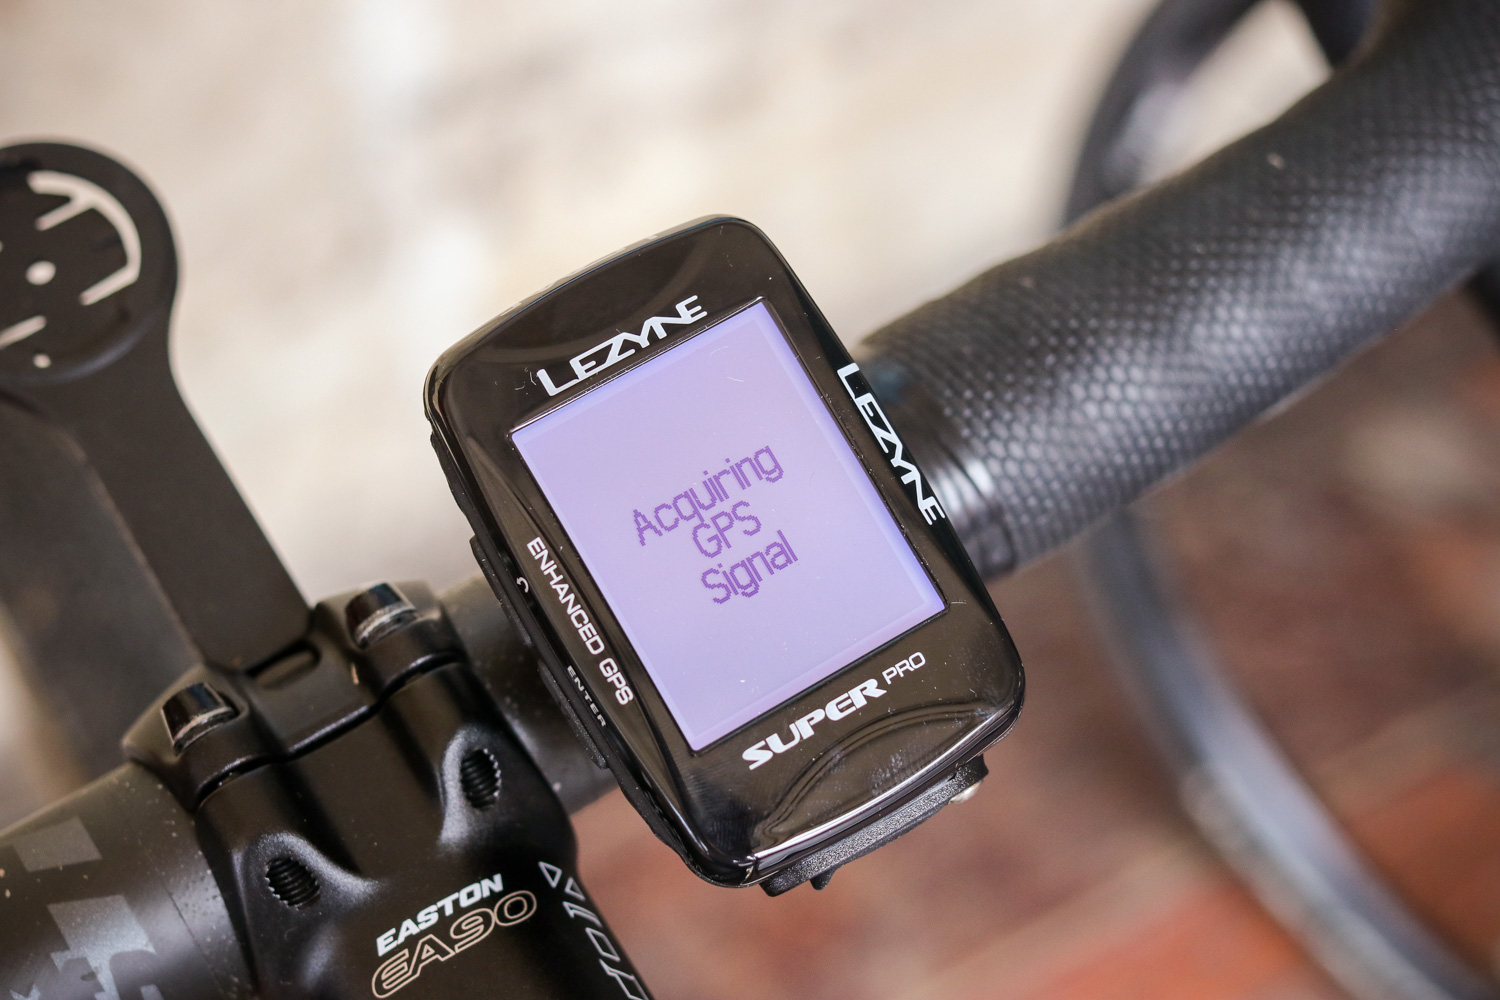 Lezyne Super Gps Cycle Computer Clearance, 60% OFF | www 